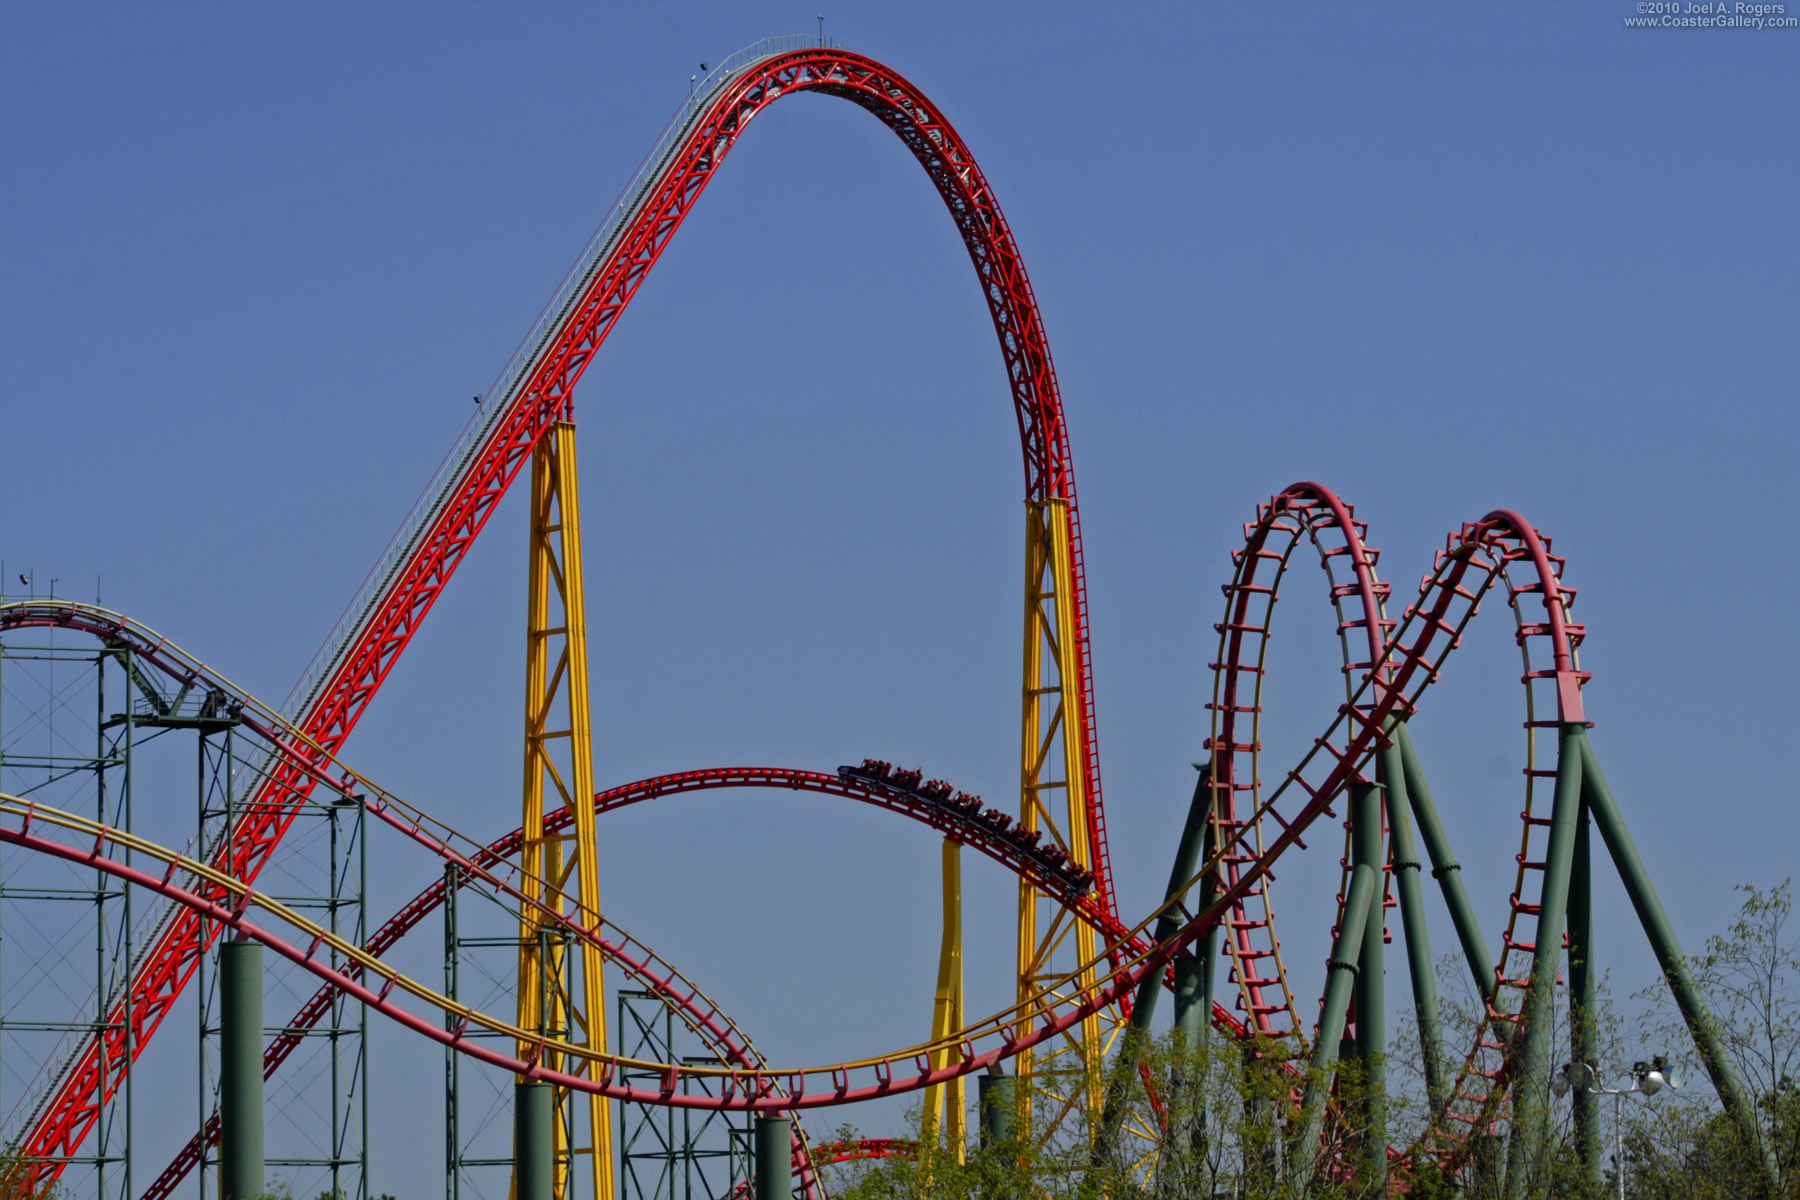 Pictures of the Intimidator 305 roller coaster